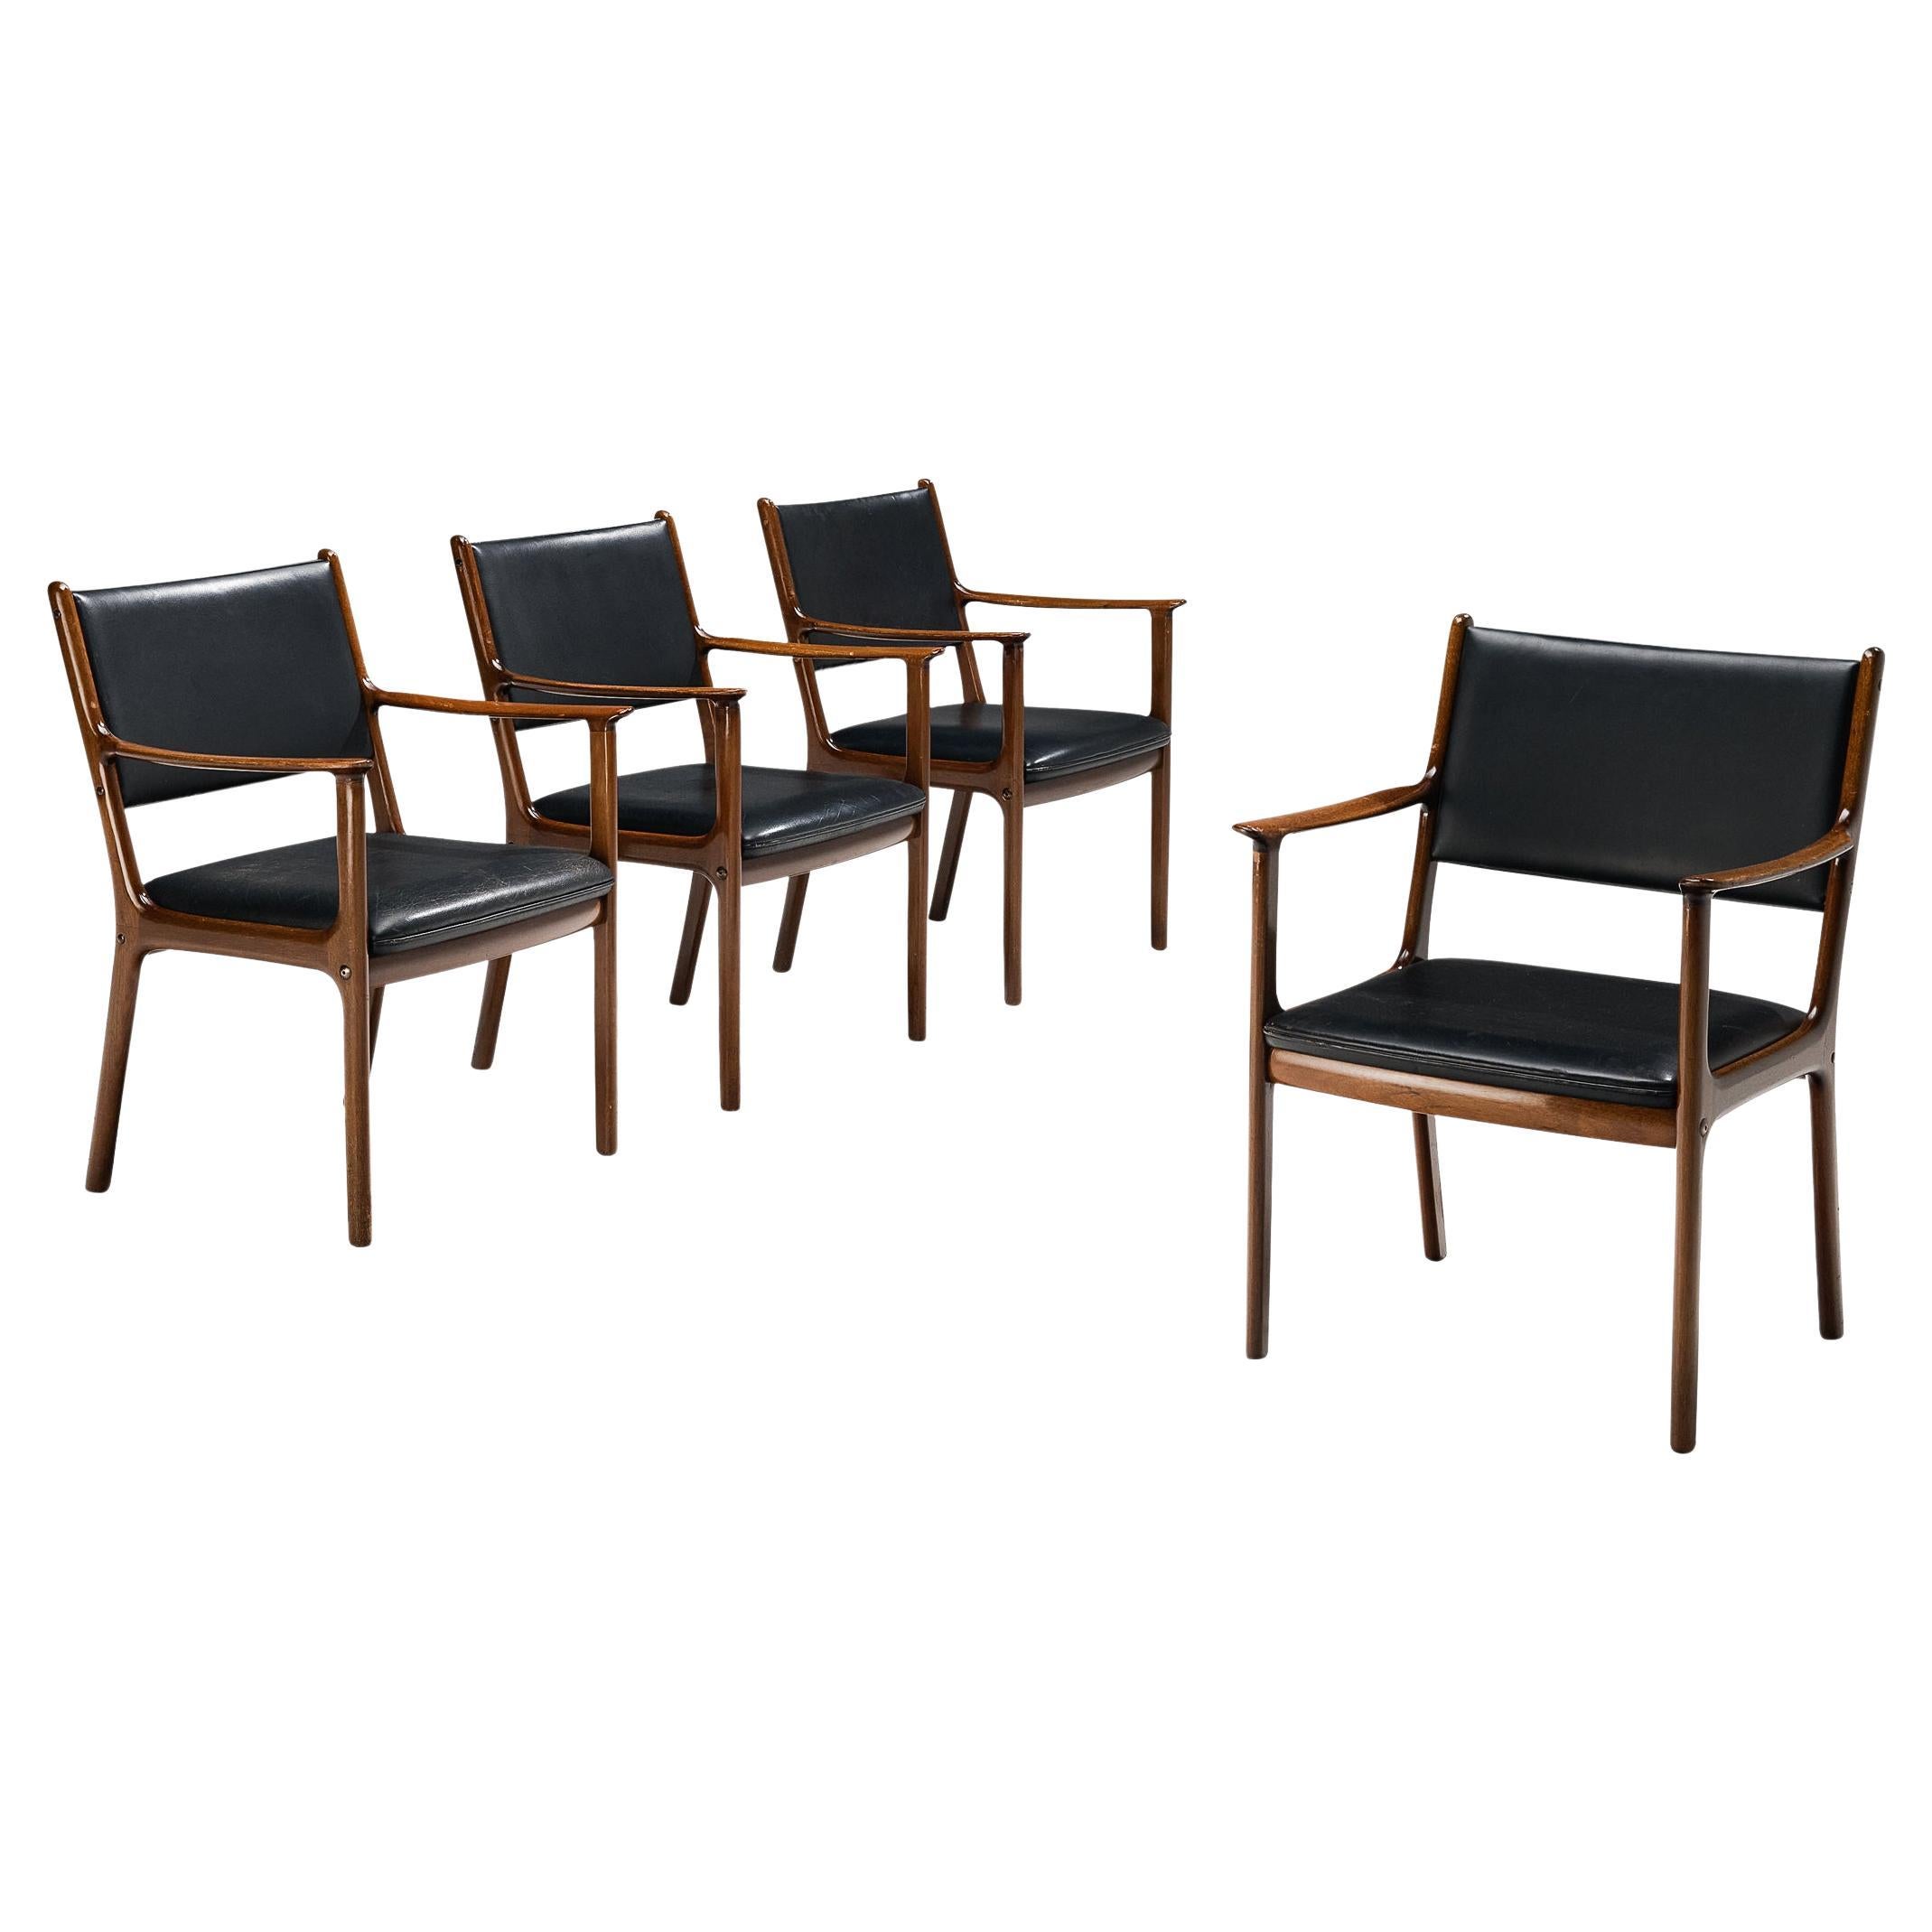 Ole Wanscher for Poul Jeppesen Set of Four Armchairs in Teak and Black Leather